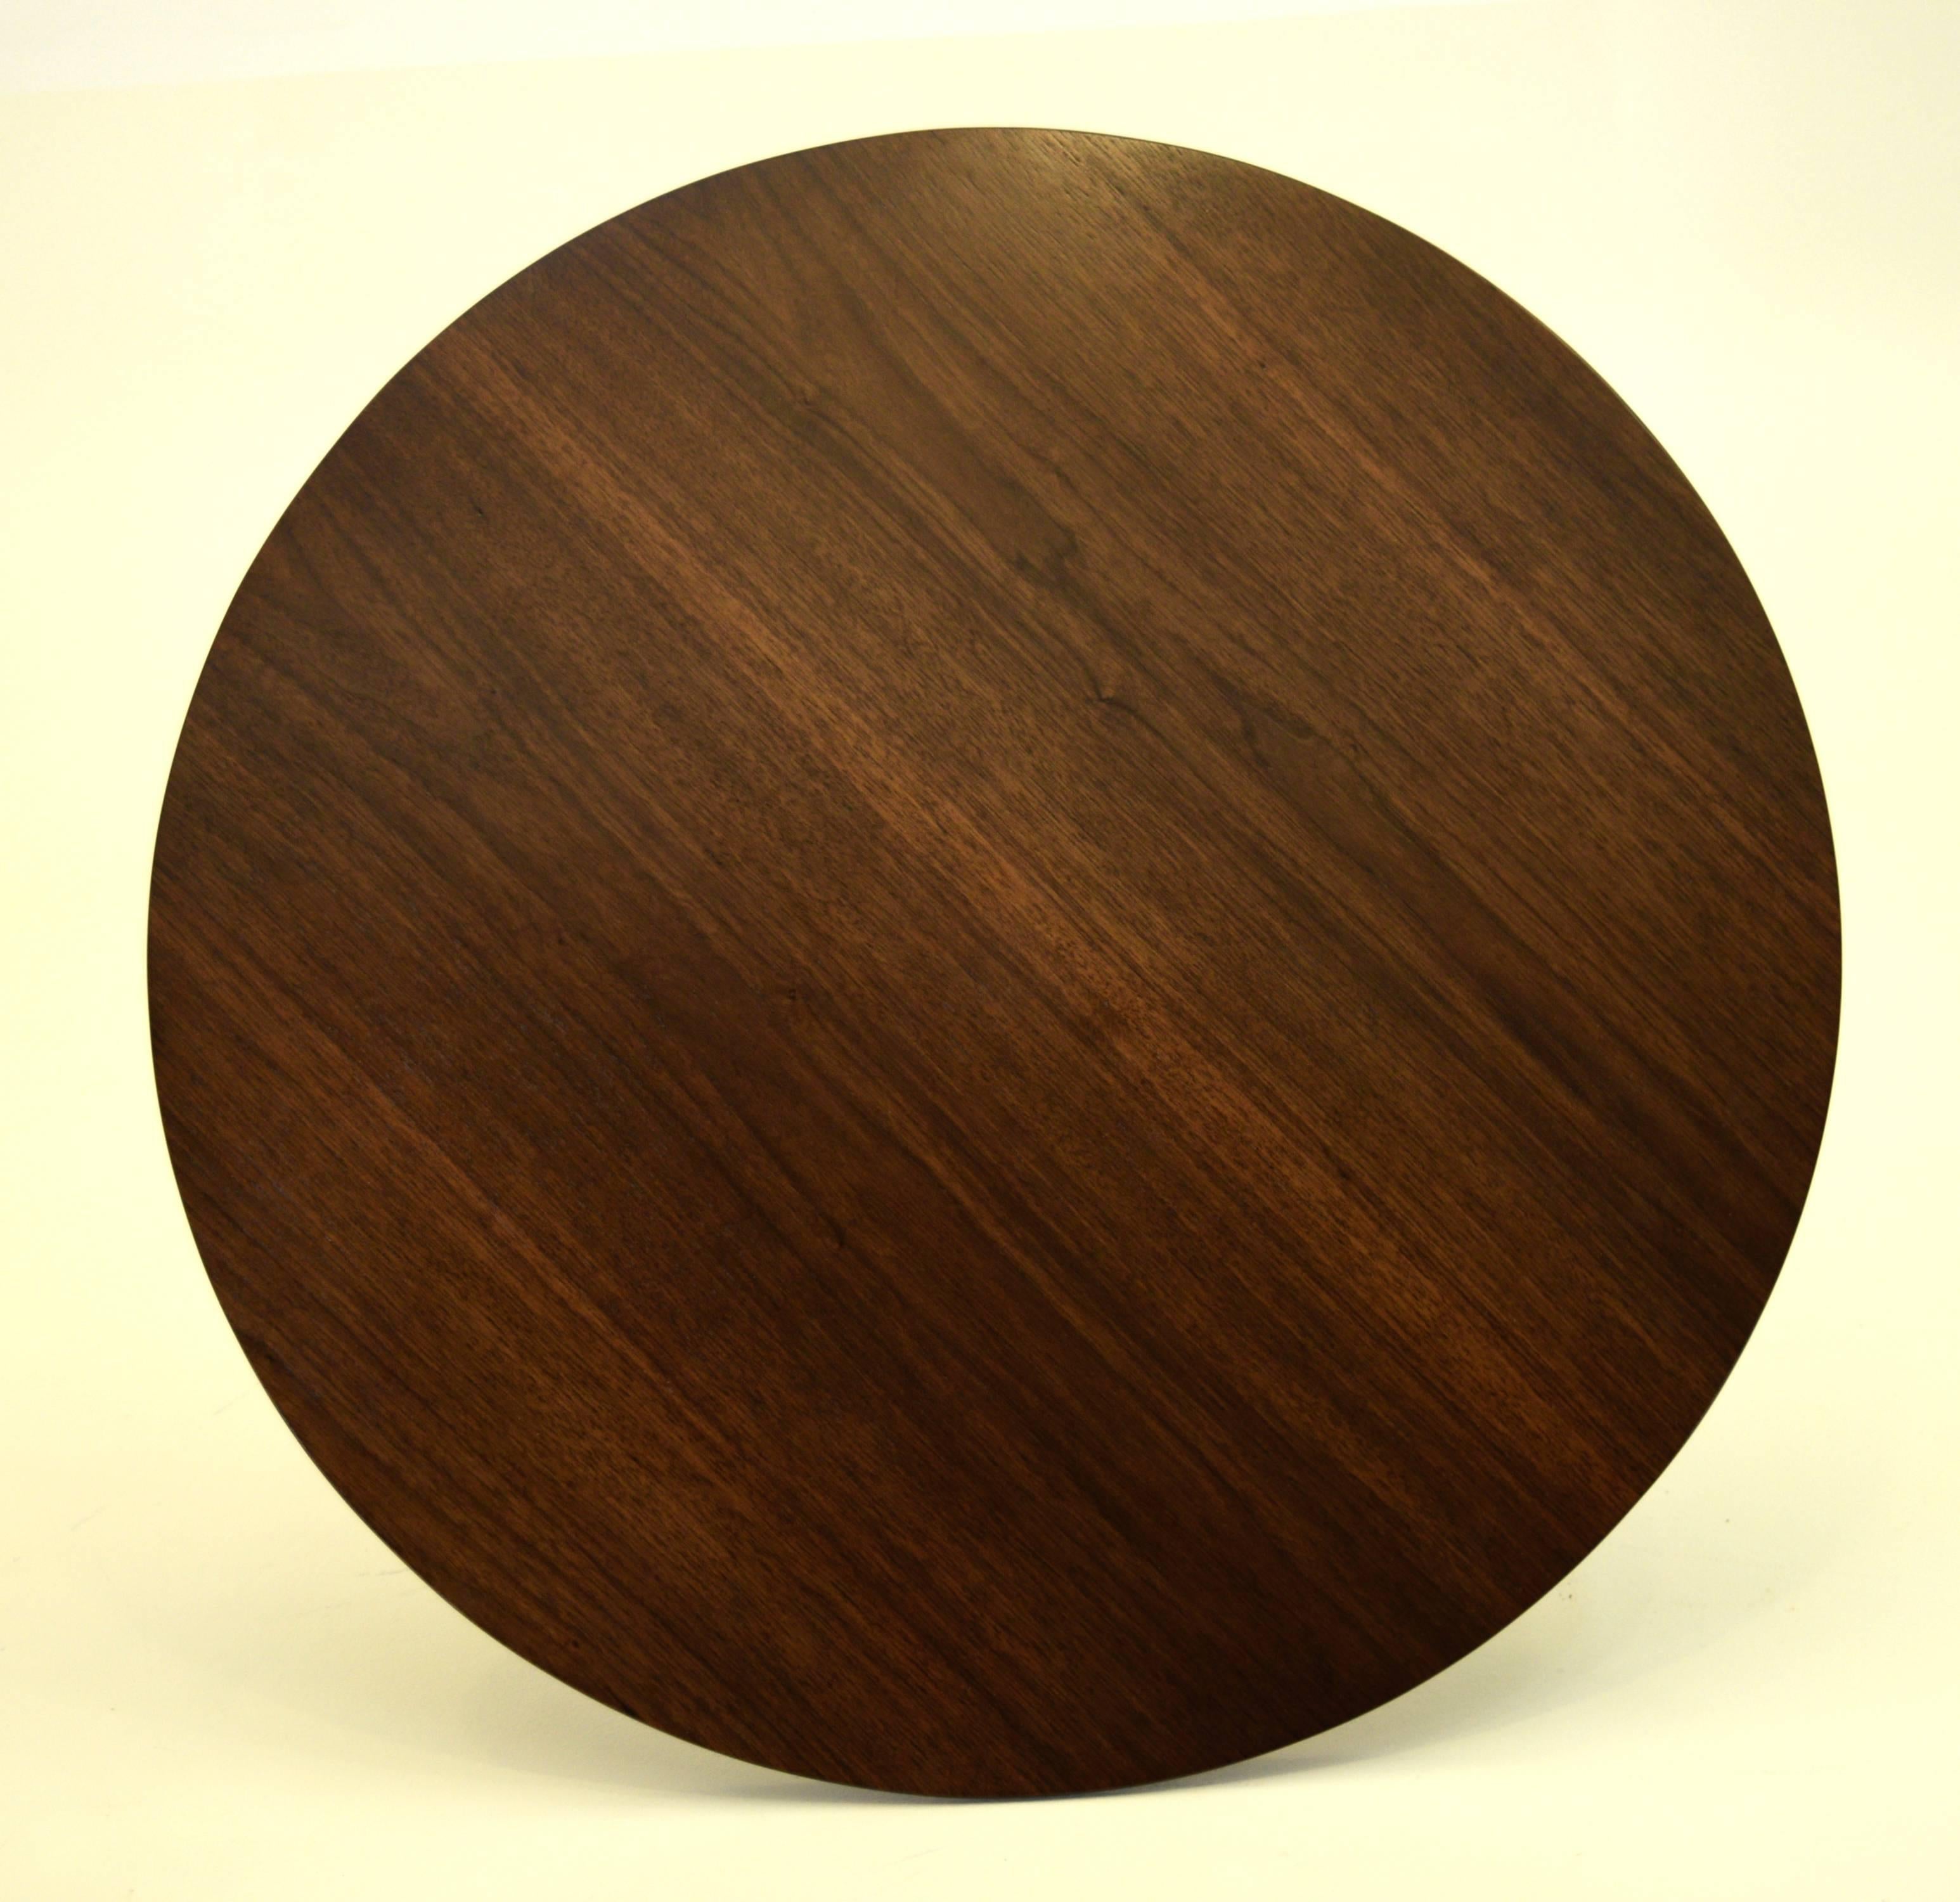 Attributed to Knoll Associates
Produced circa 1960.
Measure: 35.75 diameter x 17.25 inch tall.

Black American walnut used in an innovative design with a four point X-base produced in stainless steel. Exceptionally strong construction. with a